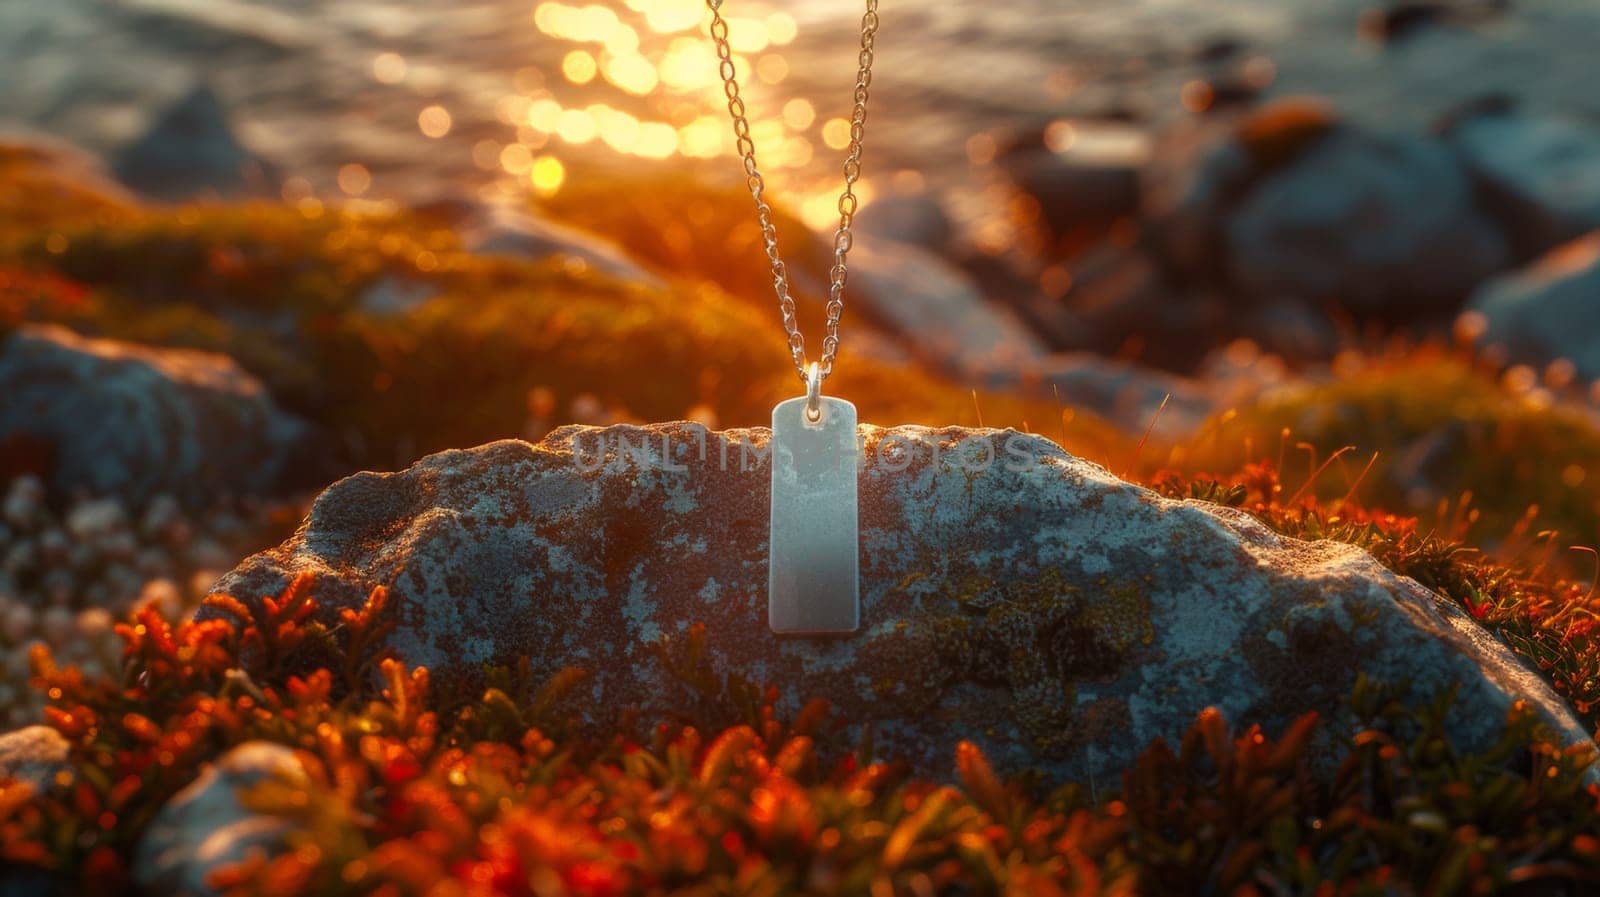 A necklace with a tag on it sitting in the grass